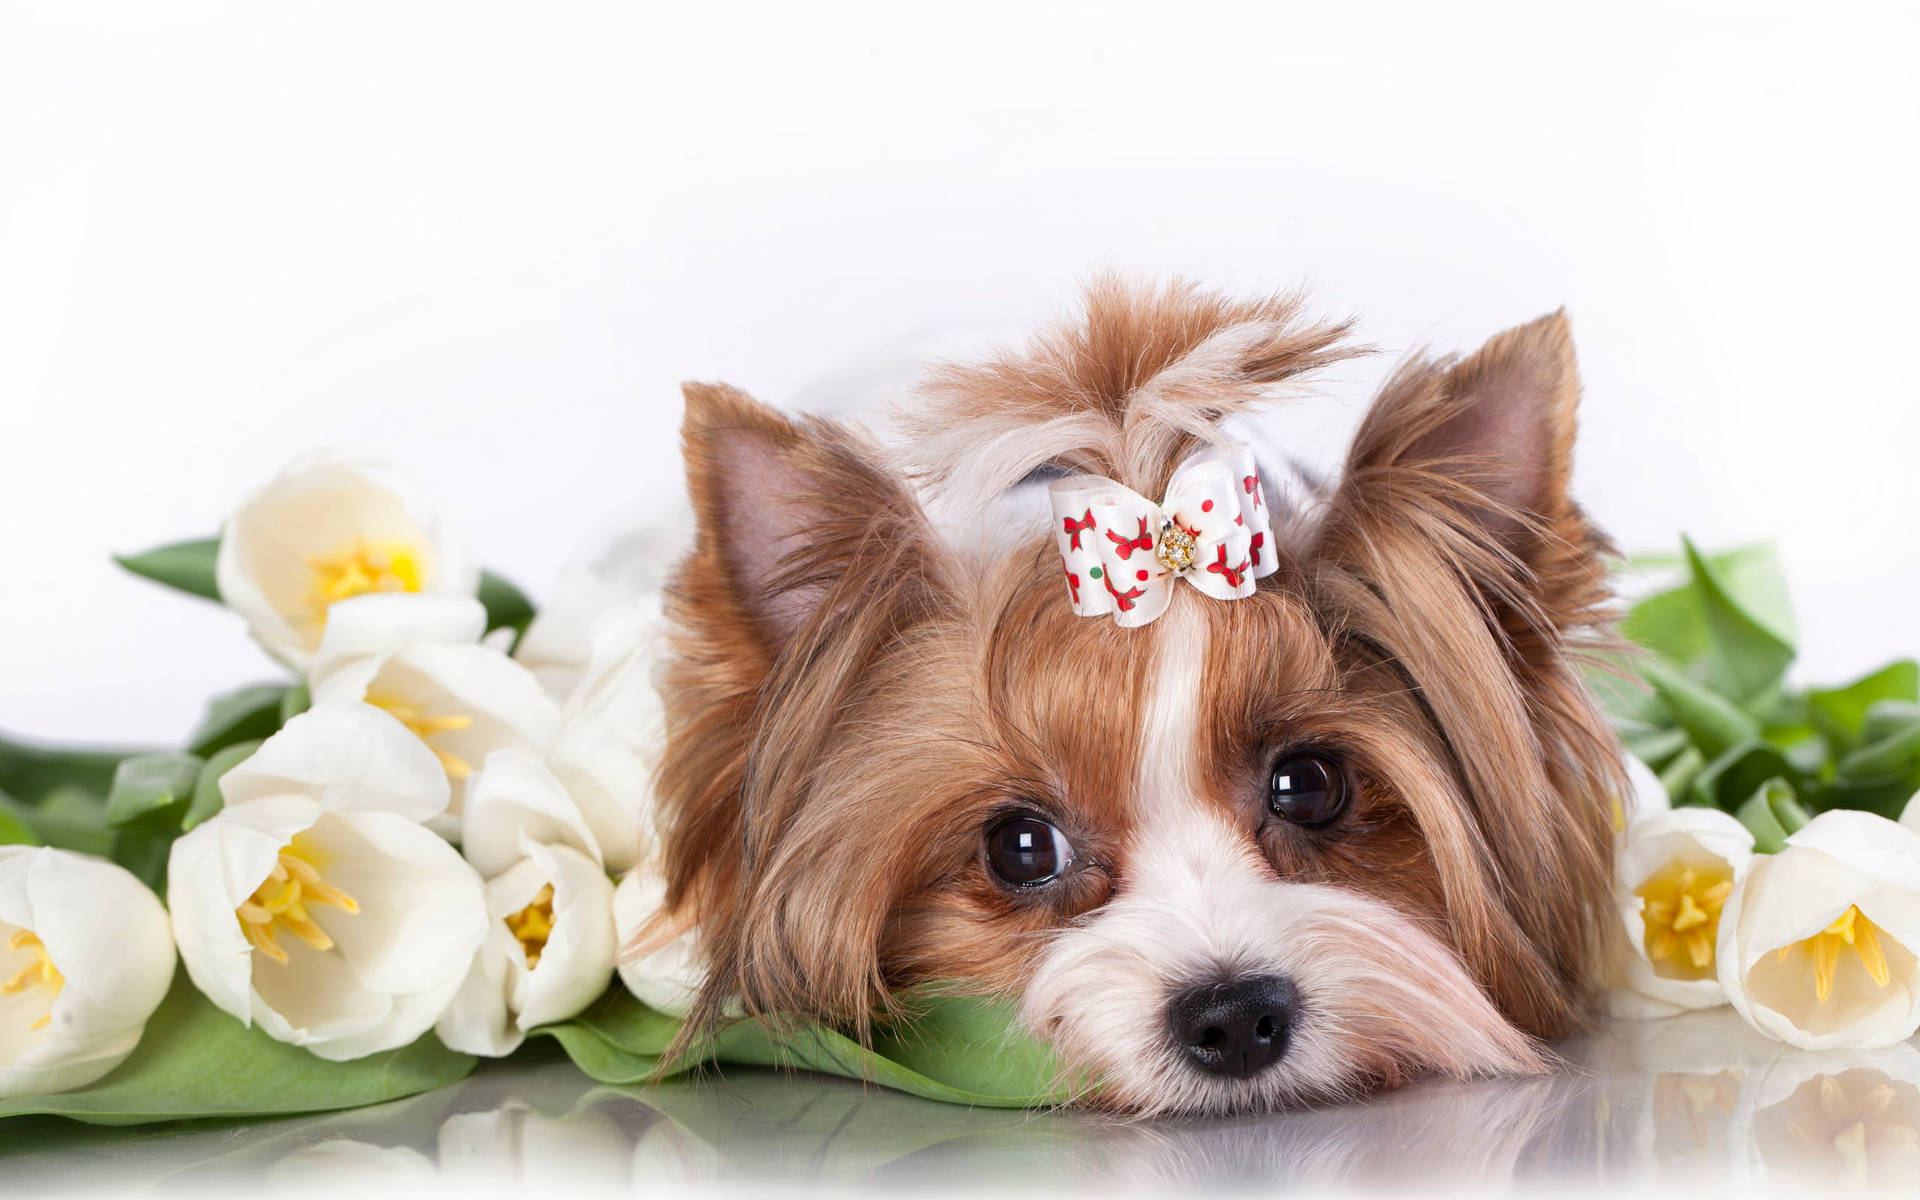 Yorkie Puppy Surrounded By Tulips Background